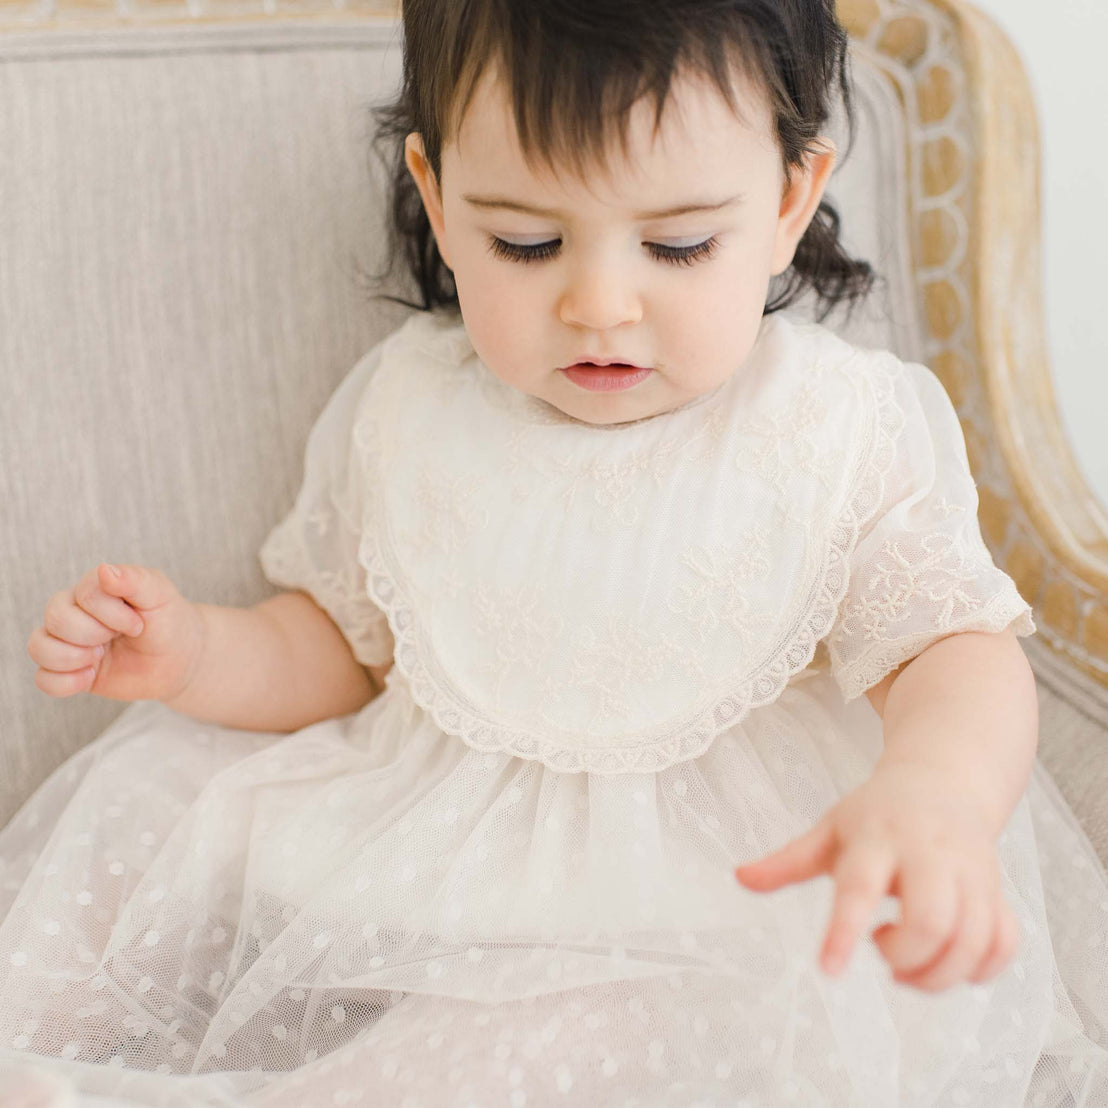 A young toddler with dark hair sits on an elegant cream-colored chair and is wearing the Jessica Cotton Bib, an ivory cotton bib overlayed with an intricate floral embroidery champagne lace, over a lace dress. She looks down curiously.